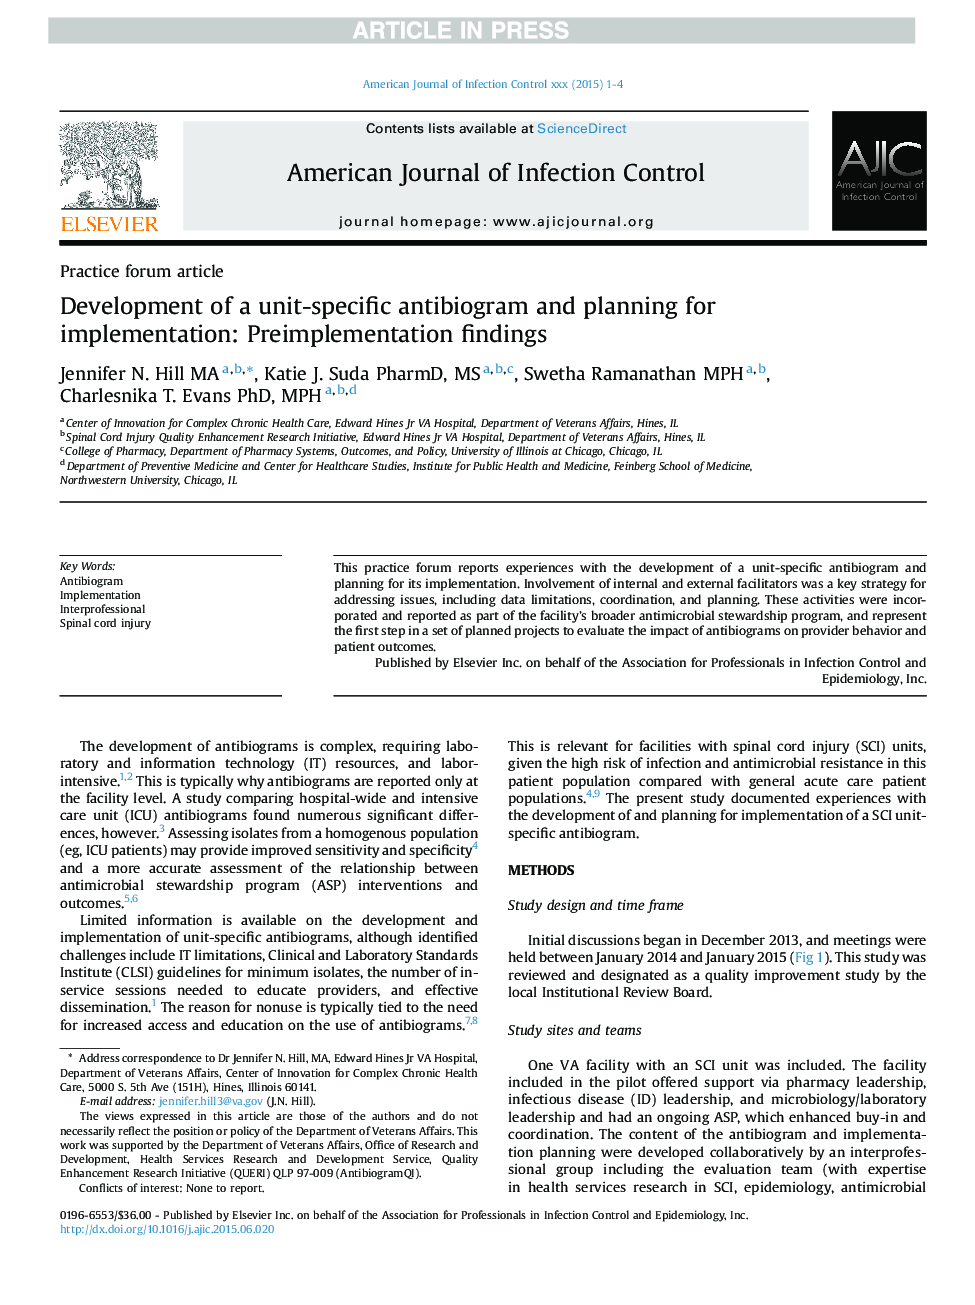 Development of a unit-specific antibiogram and planning for implementation: Preimplementation findings